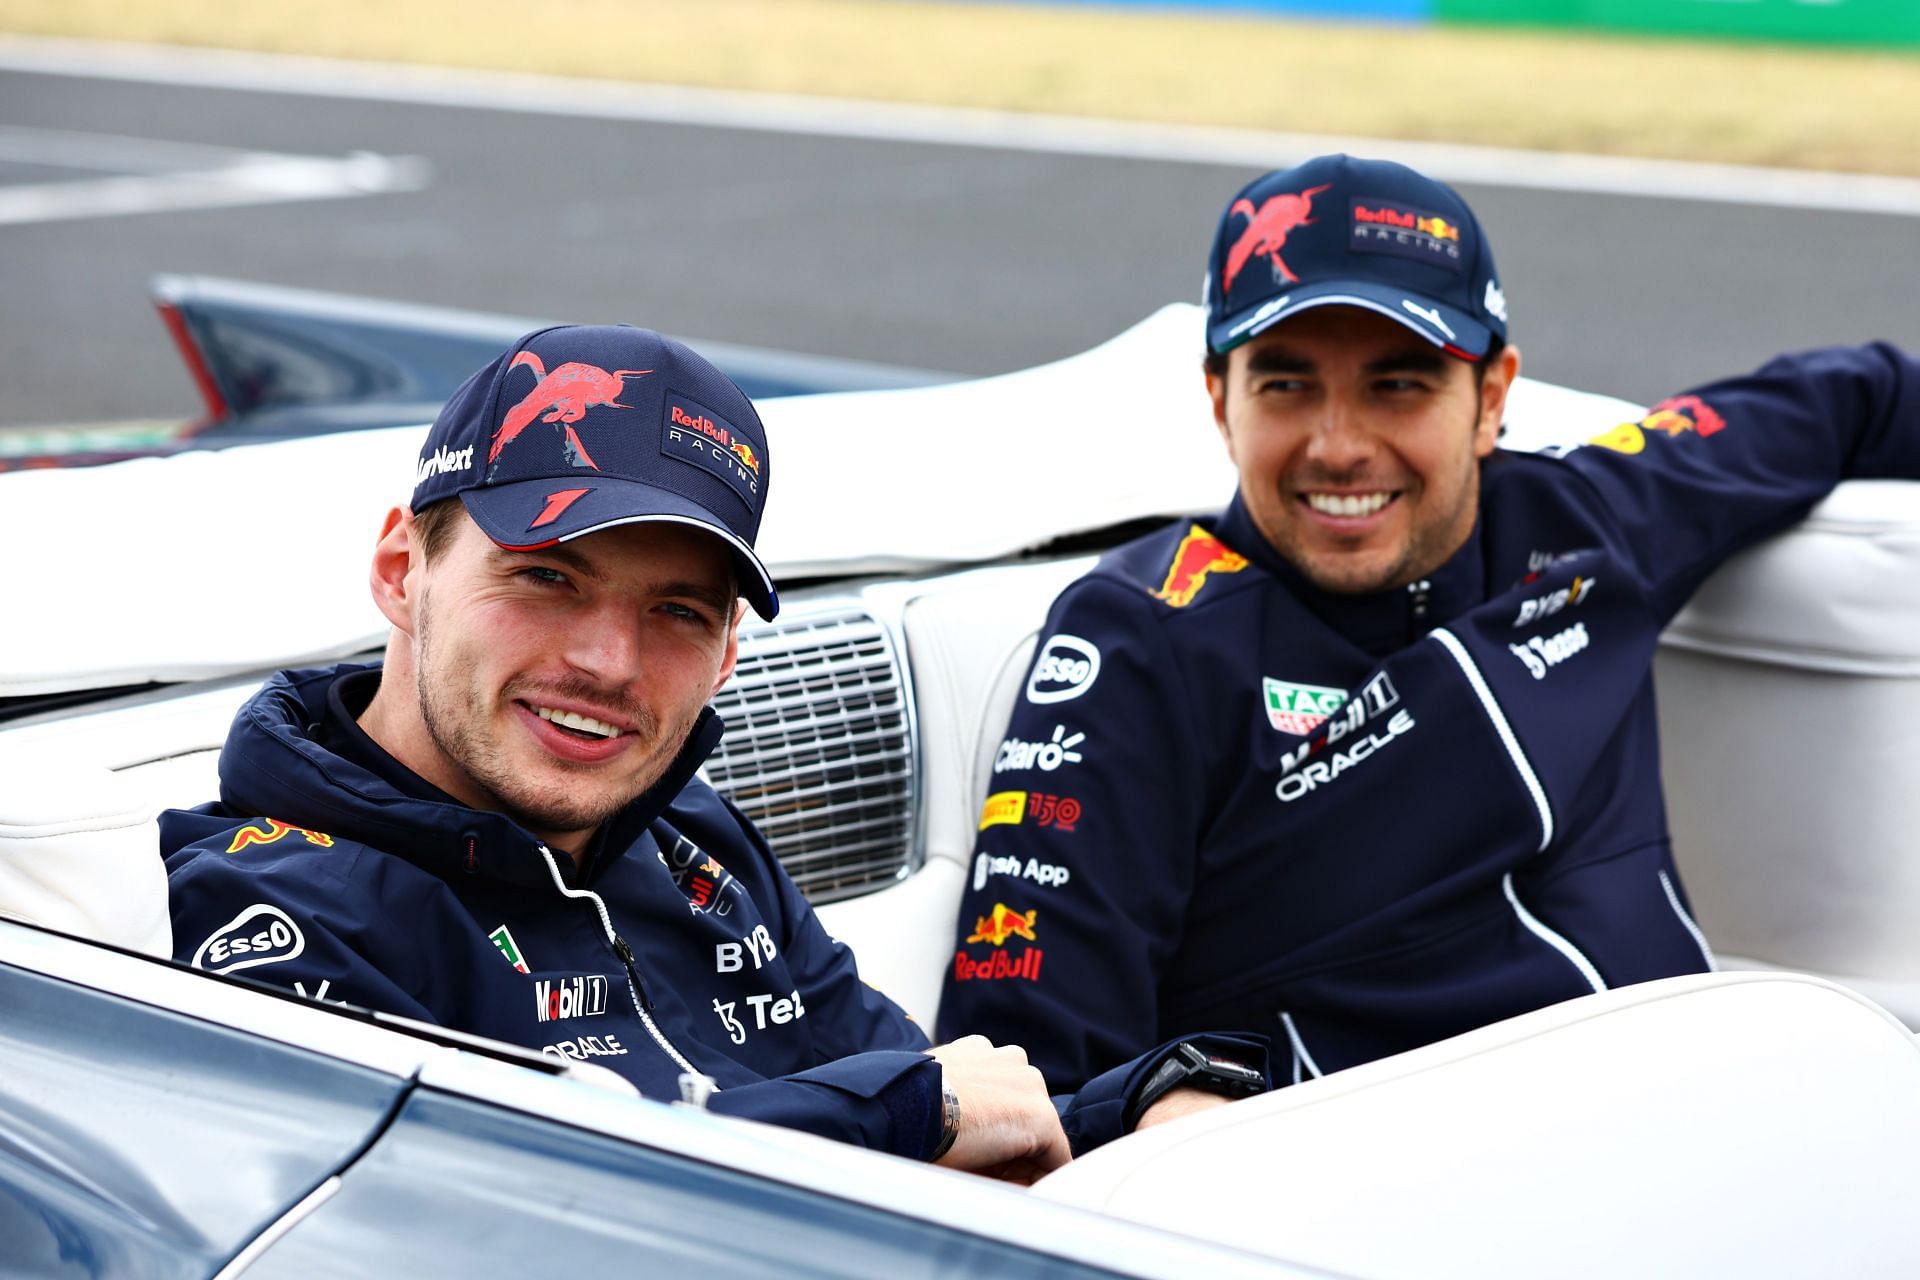 Sergio Perez will partner with Max Verstappen for two more years